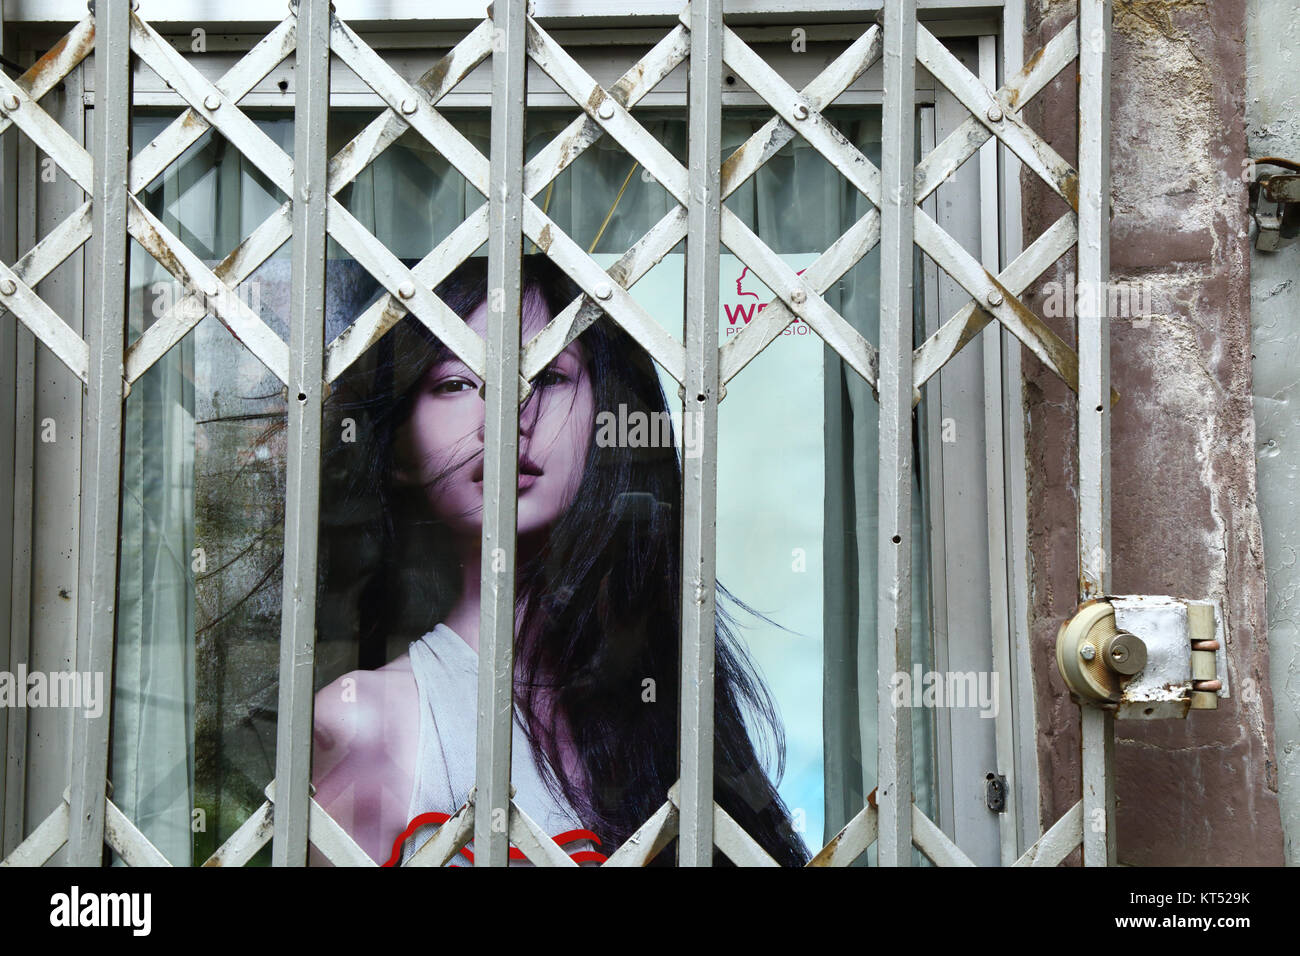 Advertising poster with face of beautiful female model behind security railings on beauty parlour entrance, La Paz, Bolivia Stock Photo